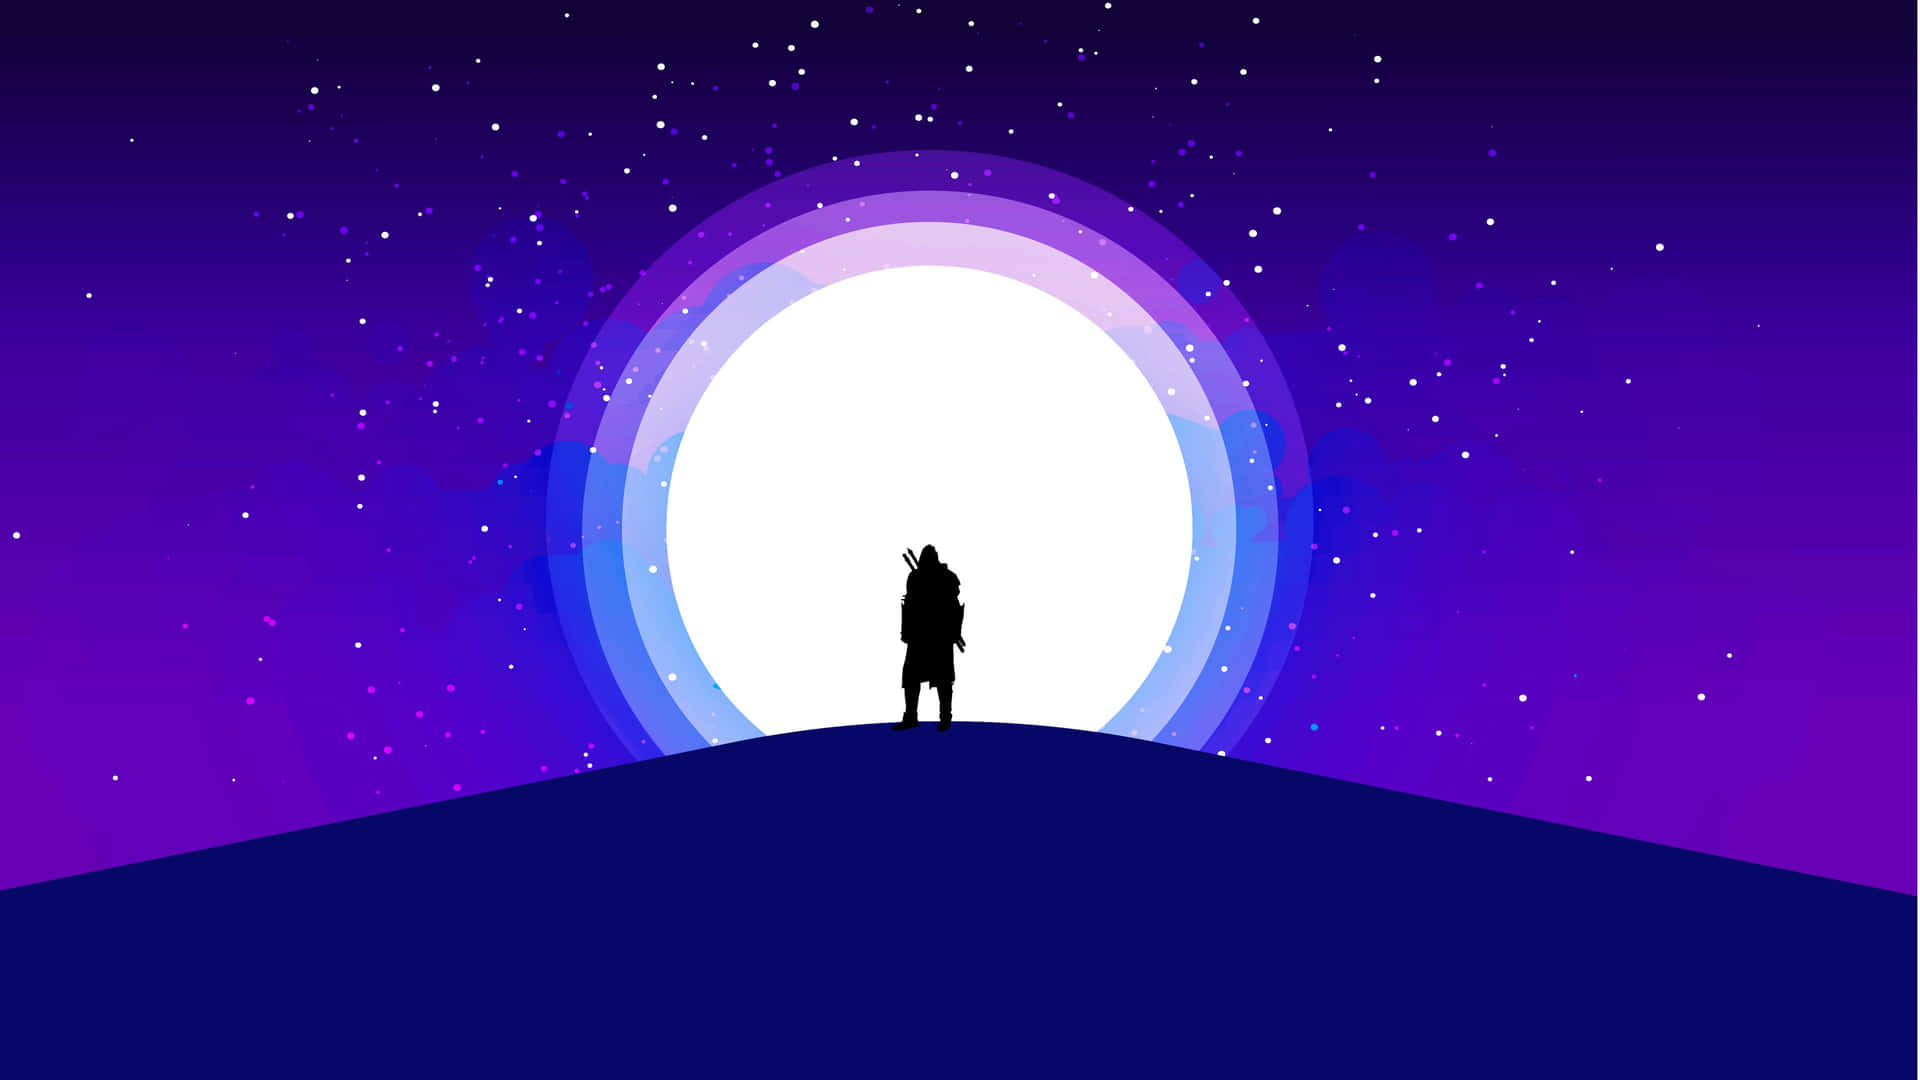 A Person Standing On A Hill With A Purple Light In The Background